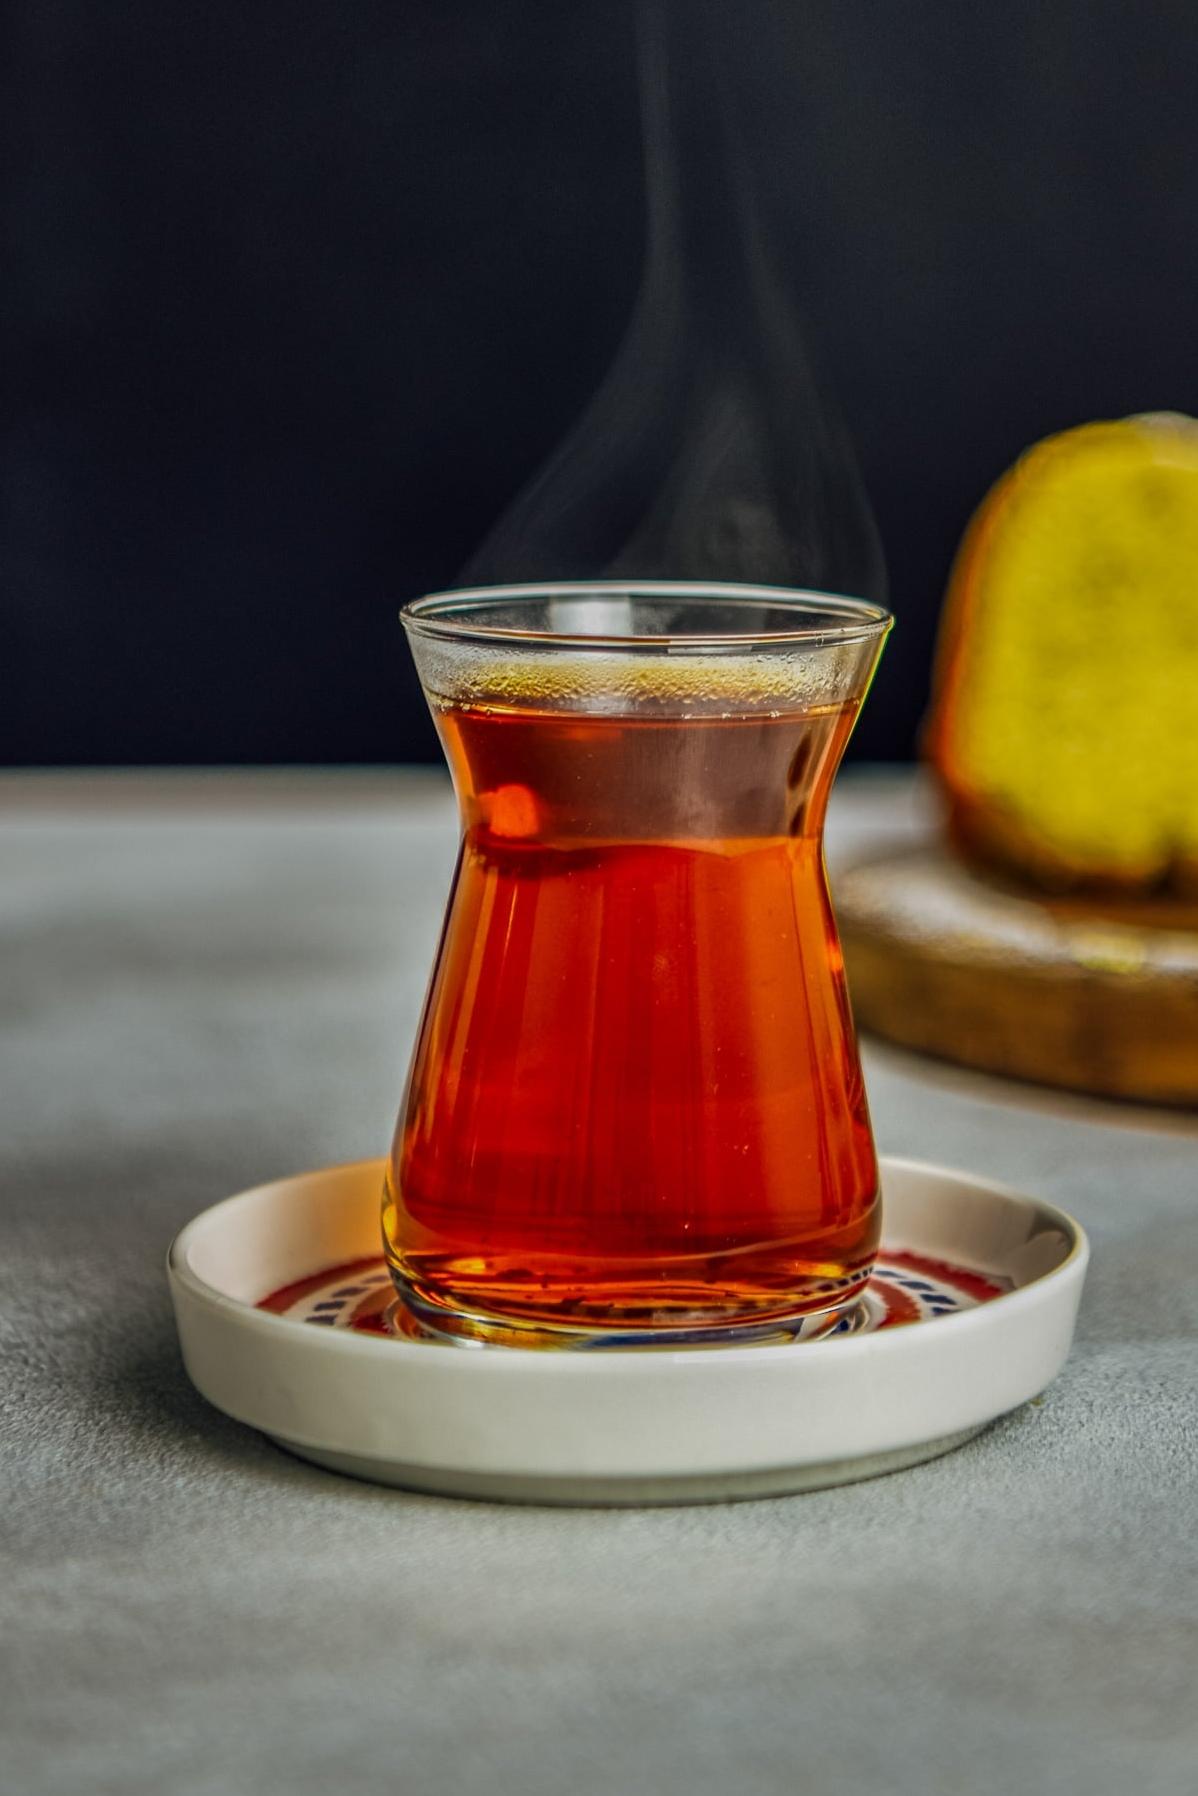  The perfect glass of Turkish tea for a cozy afternoon.